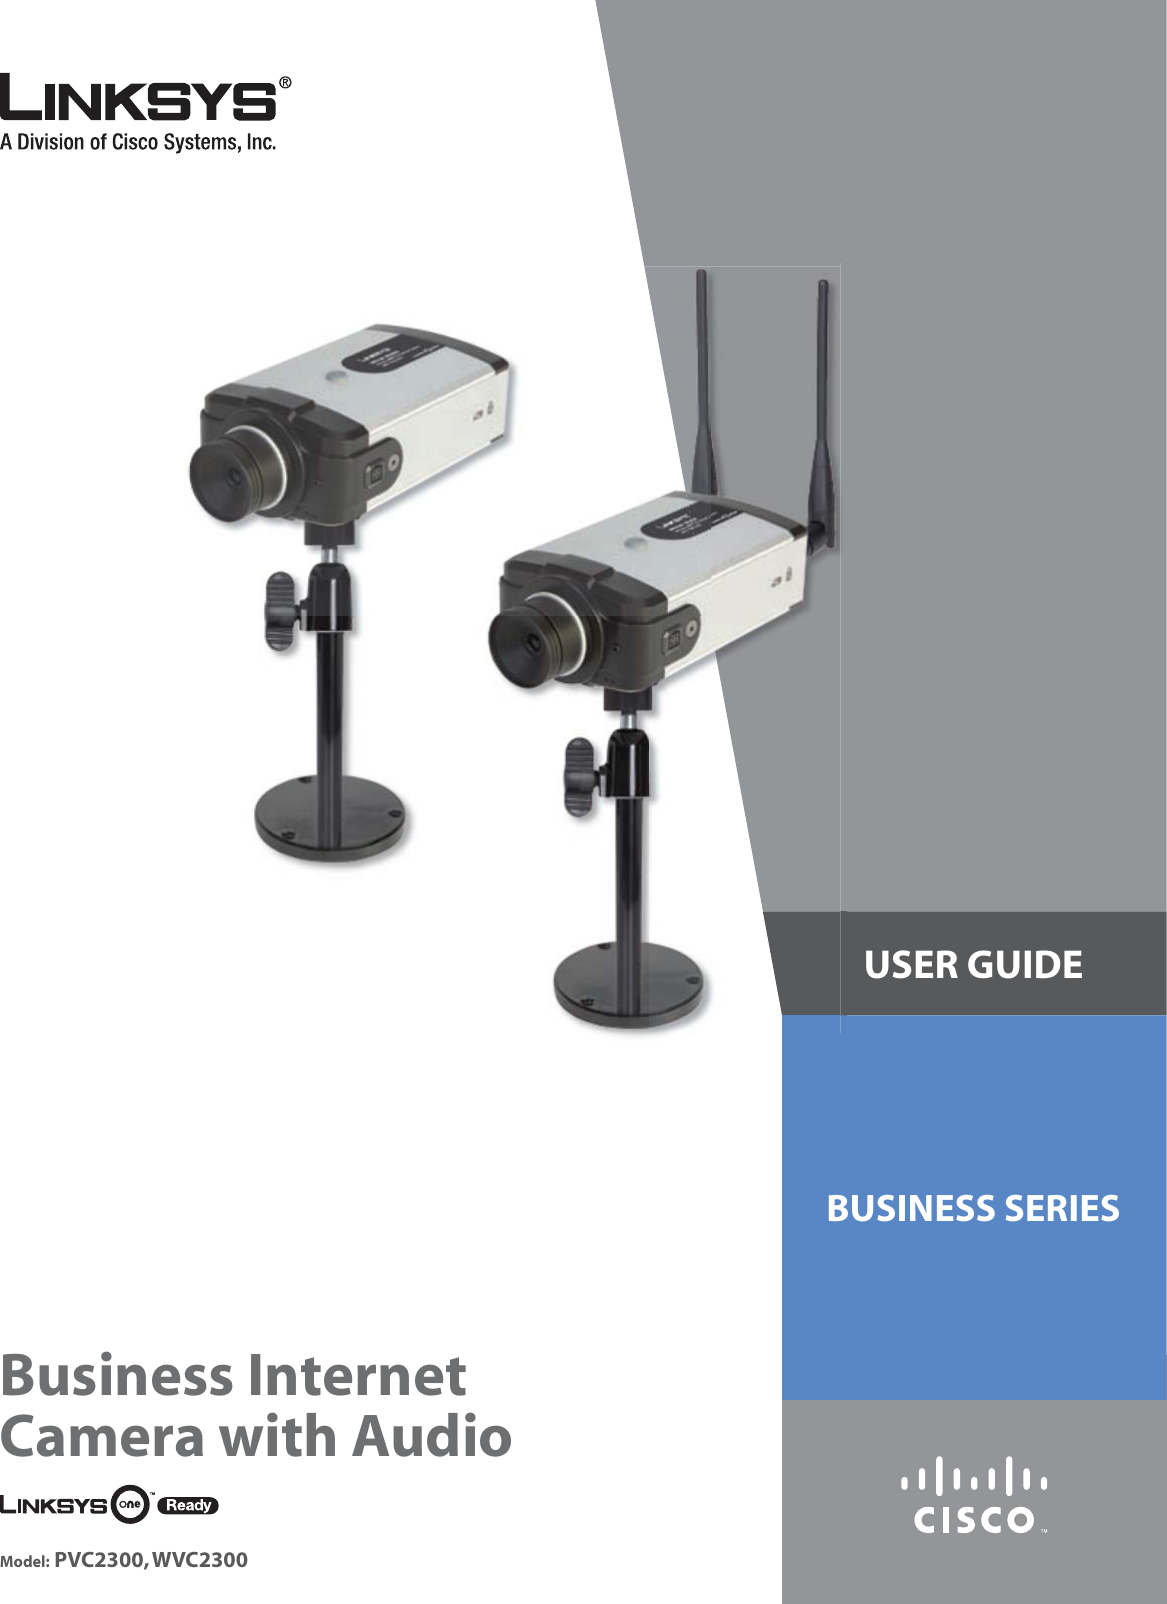 USER GUIDEBUSINESS SERIESBusiness Internet Camera with AudioModel: PVC2300, WVC2300